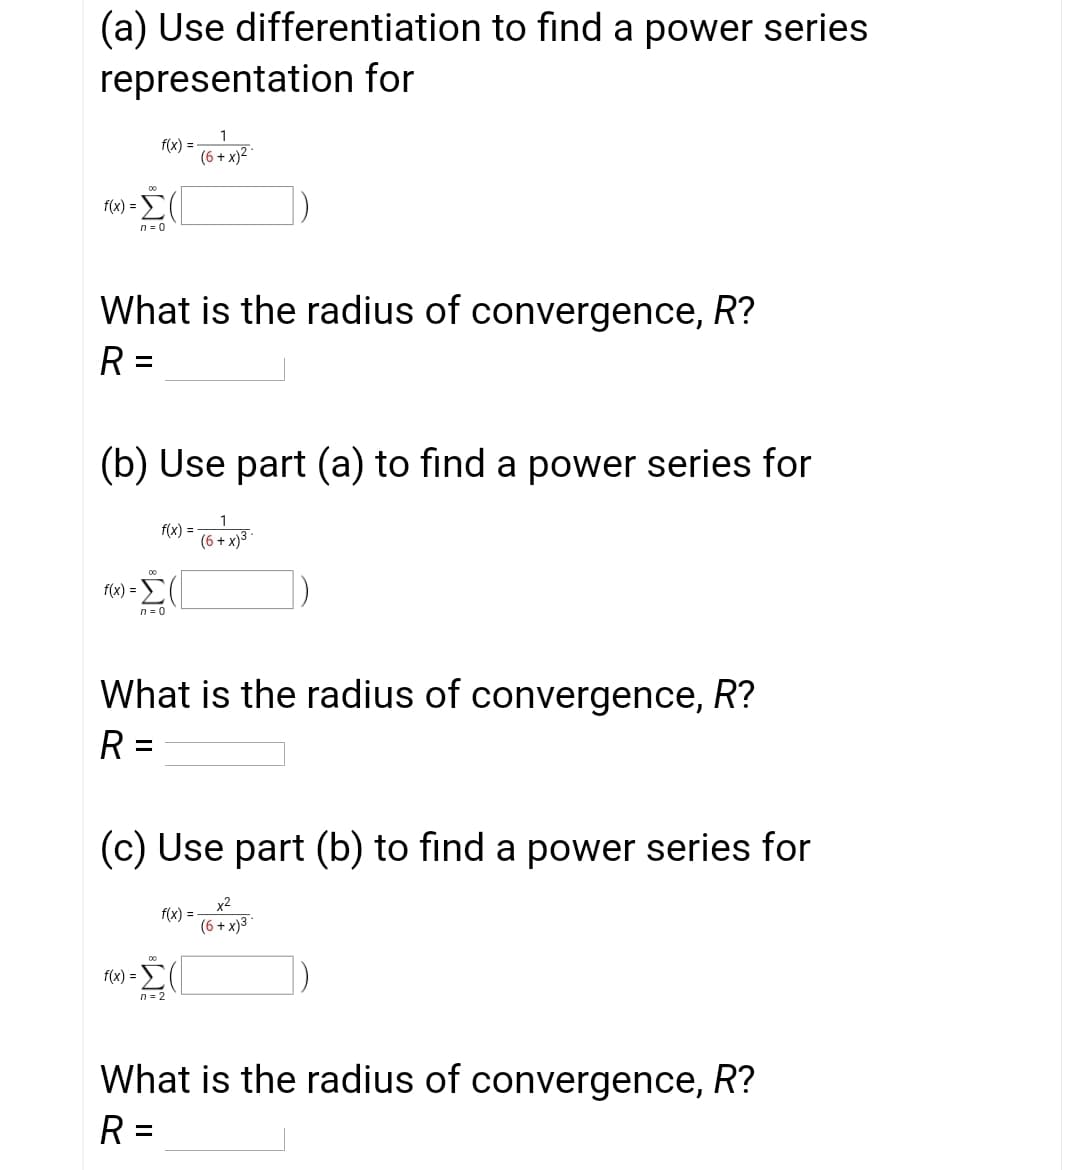 (a) Use differentiation to find a power series
representation for
1
f(x) =
(6 + x)² *
f(x) =
n = 0
What is the radius of convergence, R?
R =
(b) Use part (a) to find a power series for
f(x) =
(6 + x)3
f(x) = E
n= 0
What is the radius of convergence, R?
R =
%3D
(c) Use part (b) to find a power series for
x2
f(x) =
(6 + x)3
f(x) =
n = 2
What is the radius of convergence, R?
R =
